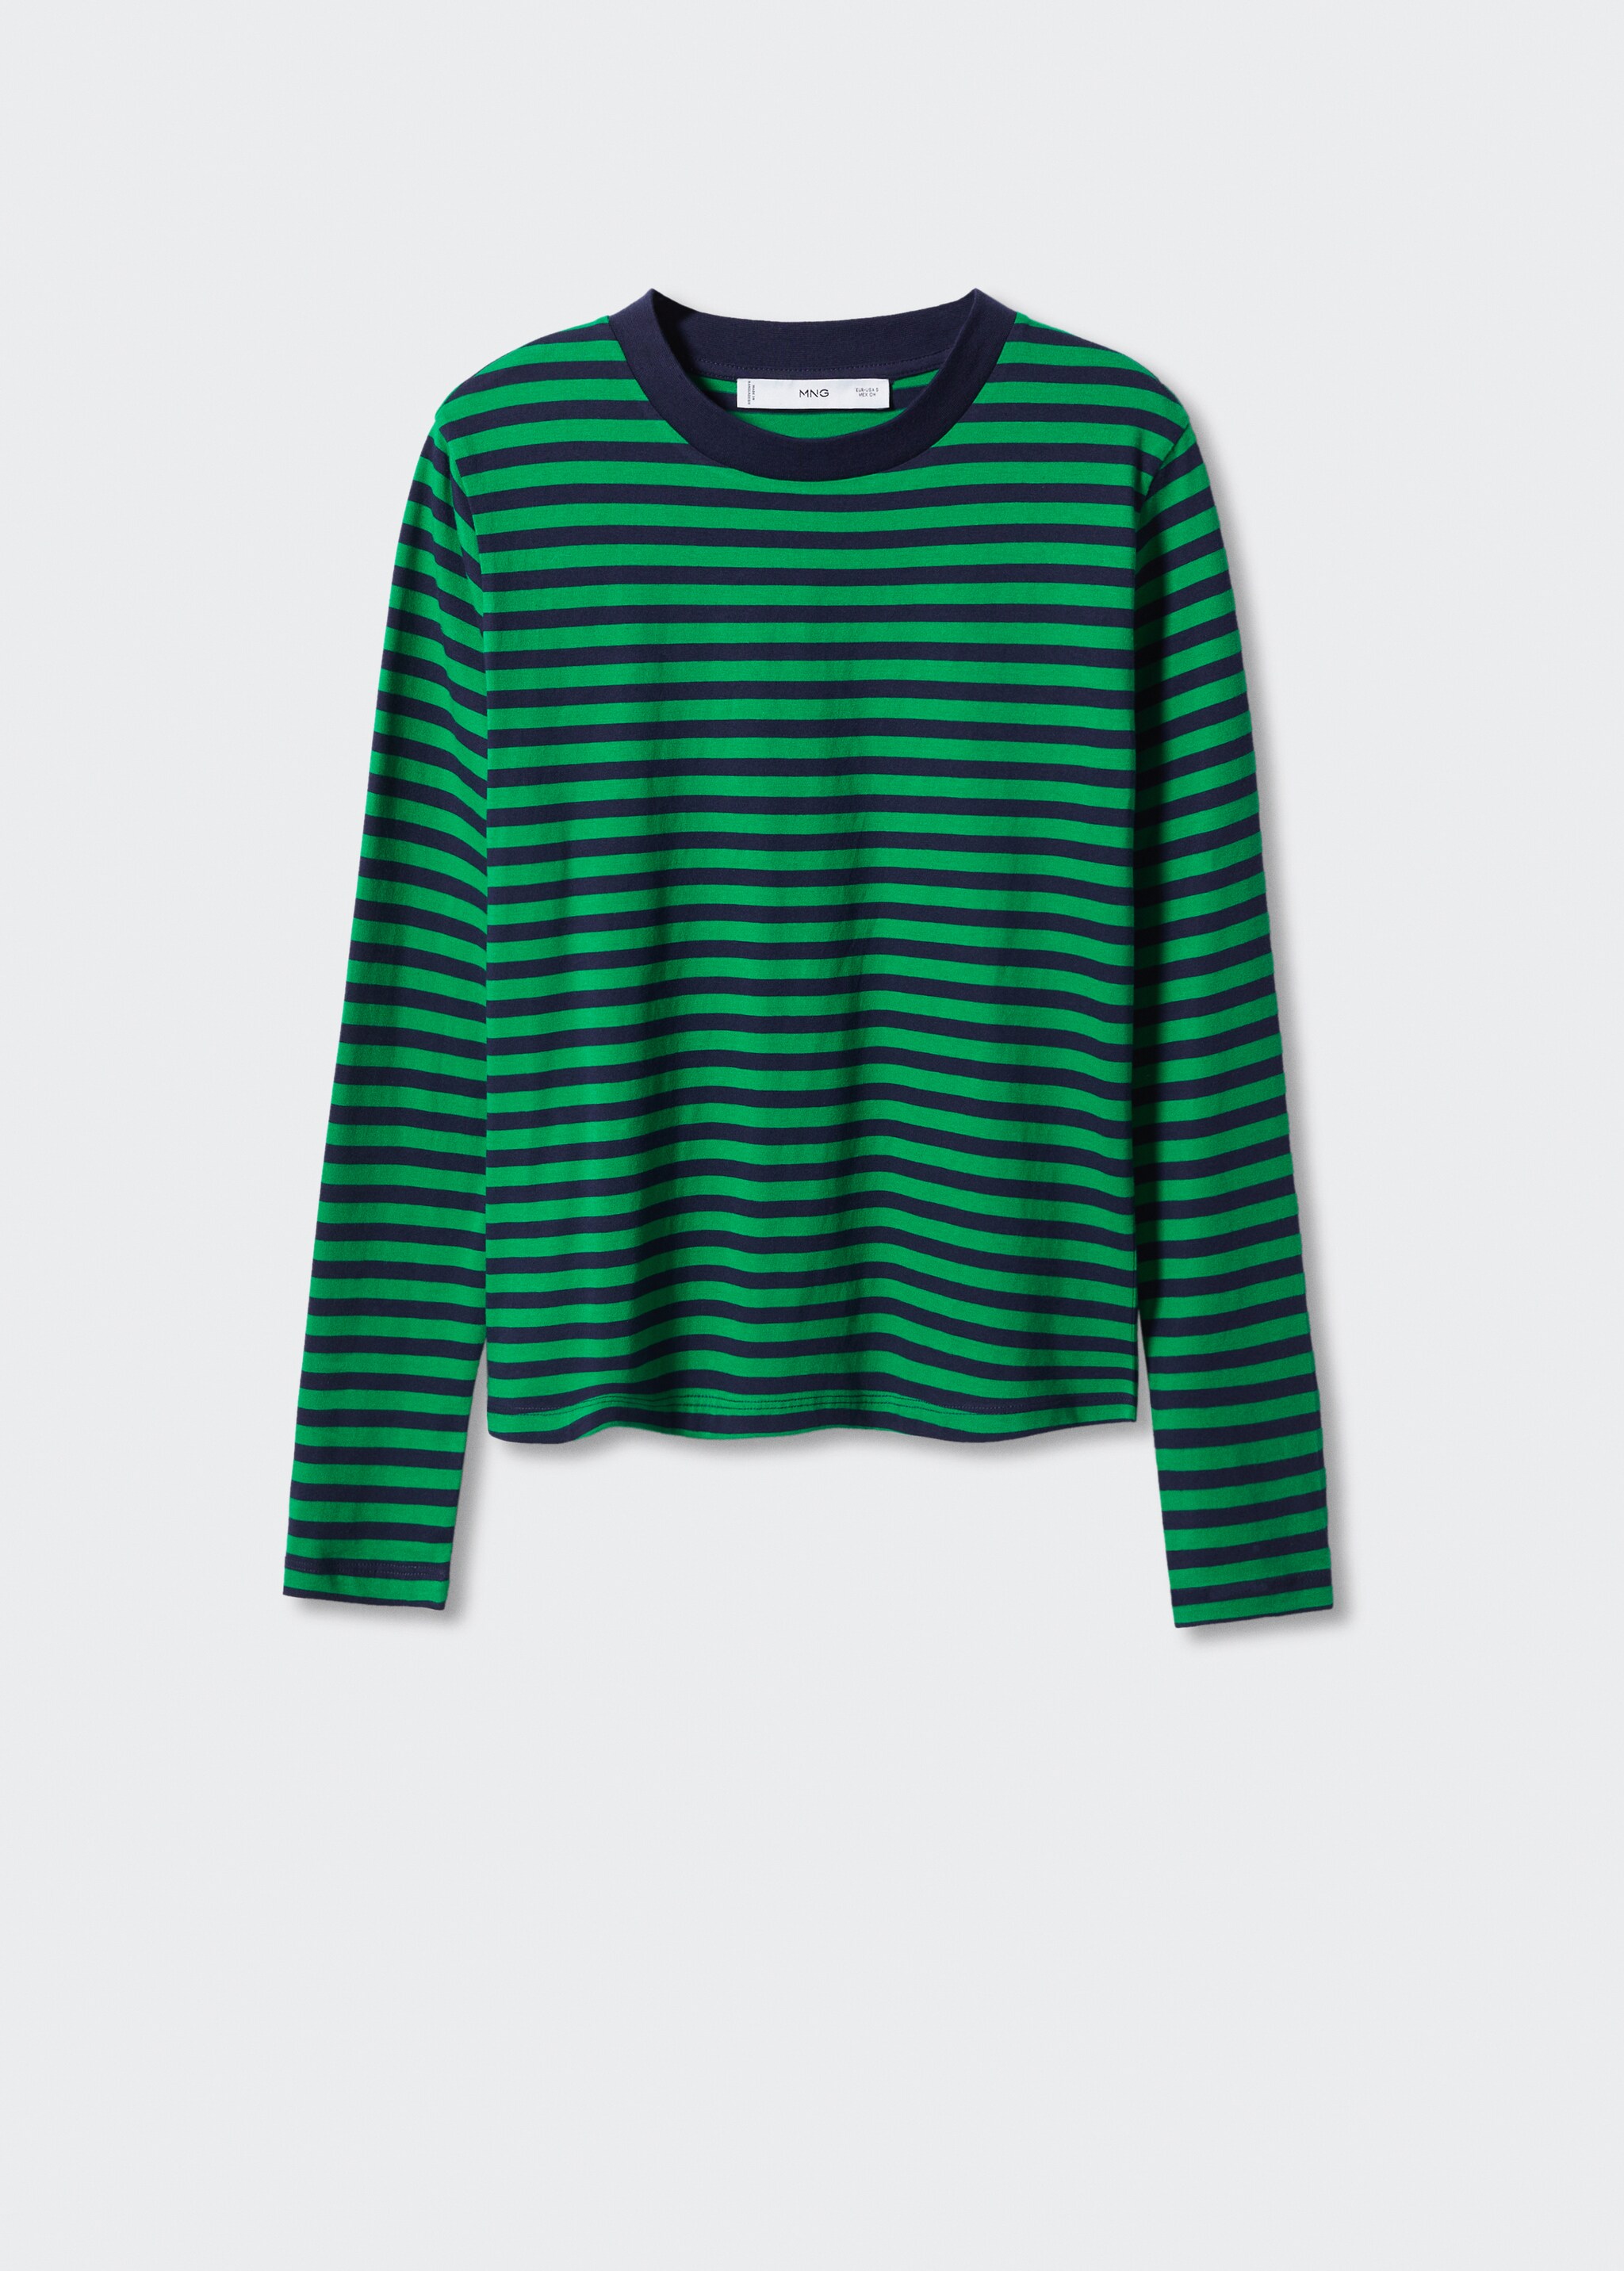 Striped 100% cotton t-shirt - Article without model